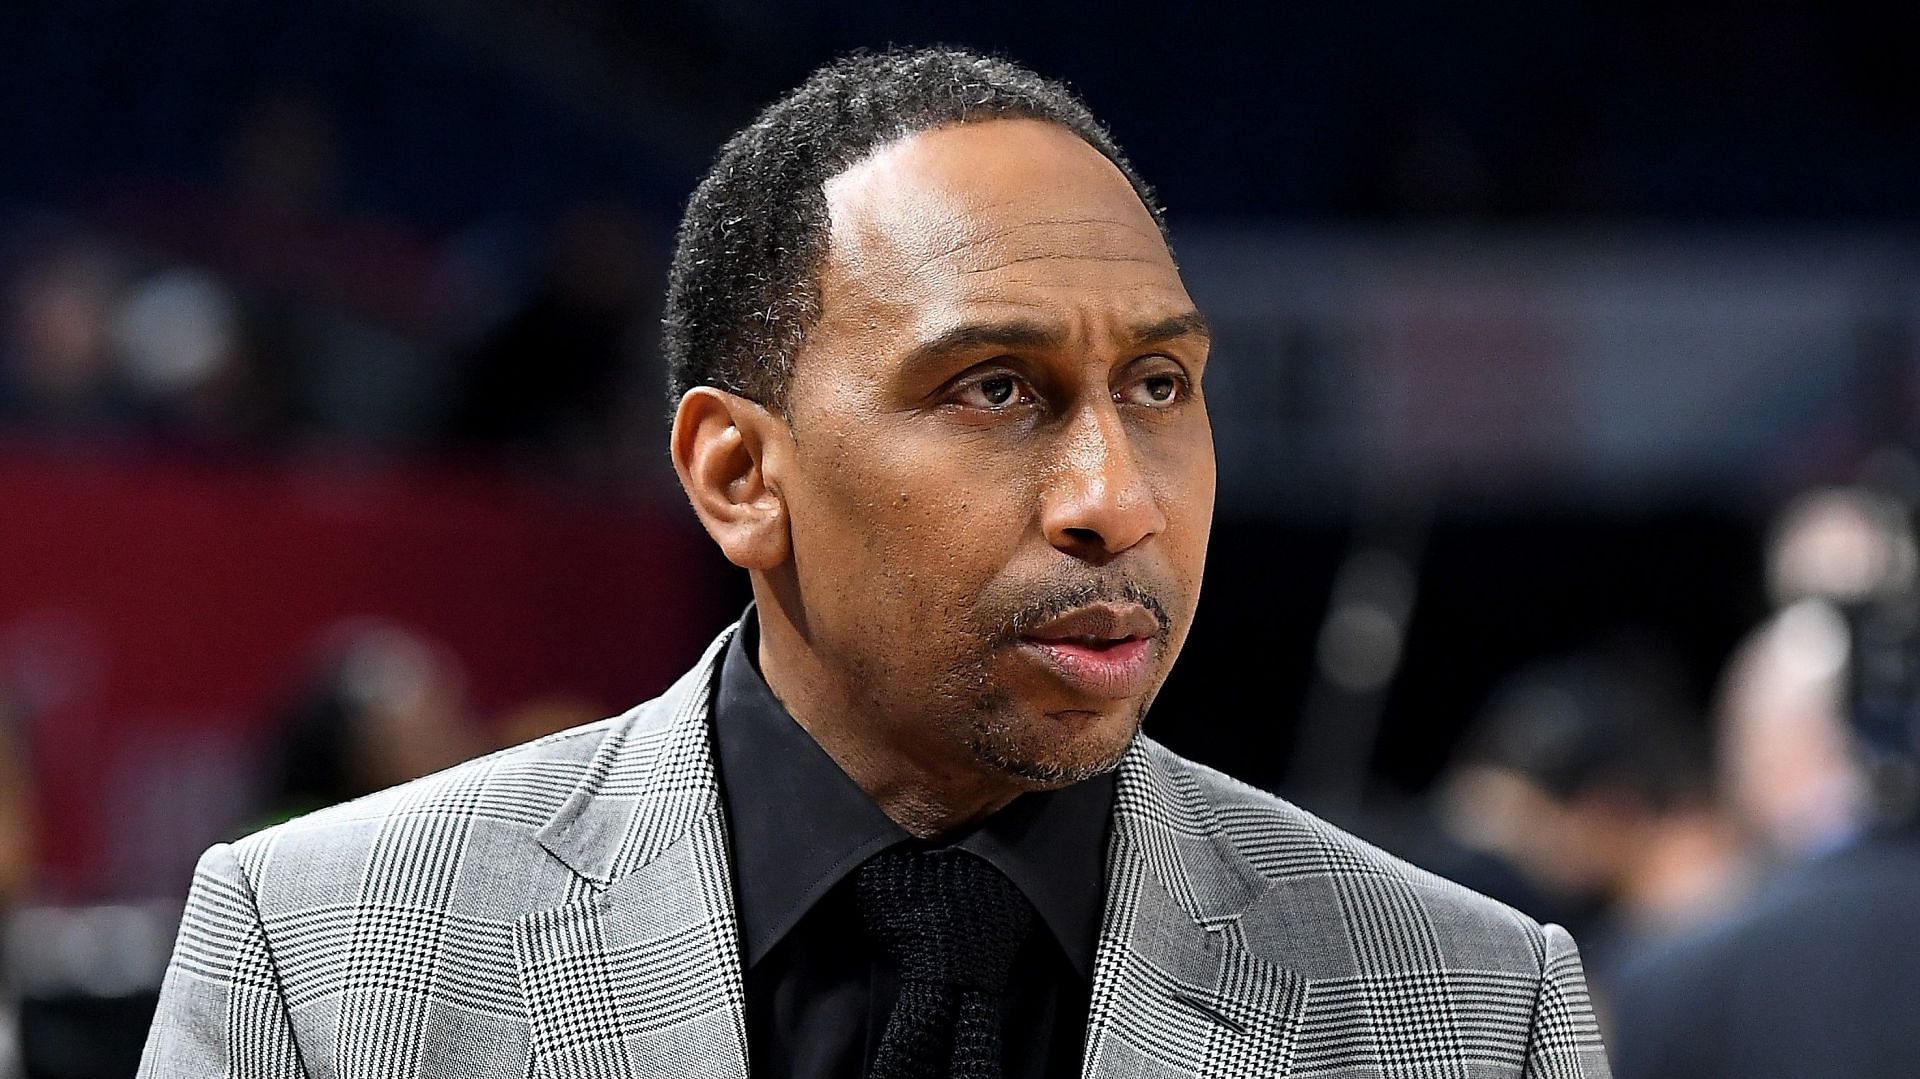 &quot;Maybe I am showing my age&quot; - Stephen A. Smith goes on epic rant calling NBA 